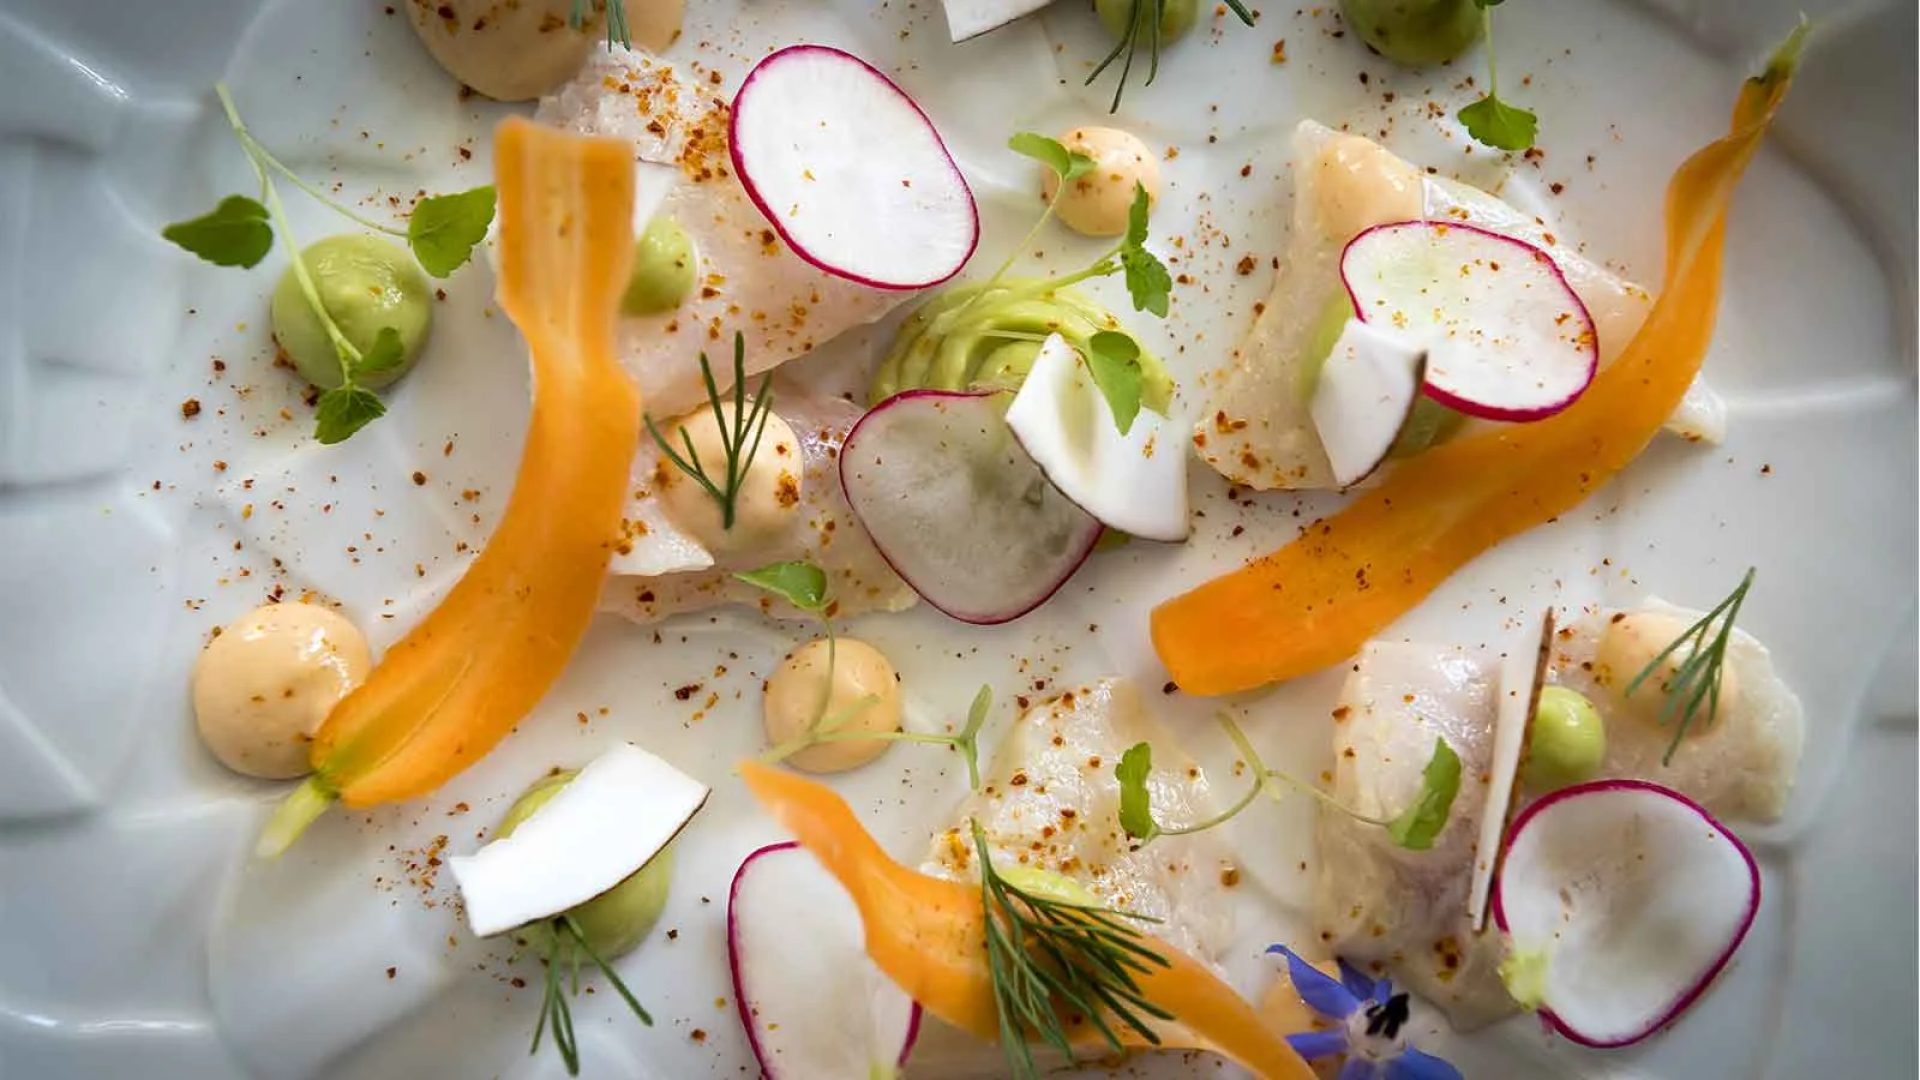 A gourmet dish made with carrots, radishes, coconut and white fish in a restaurant in Haute-Loire, Auvergne